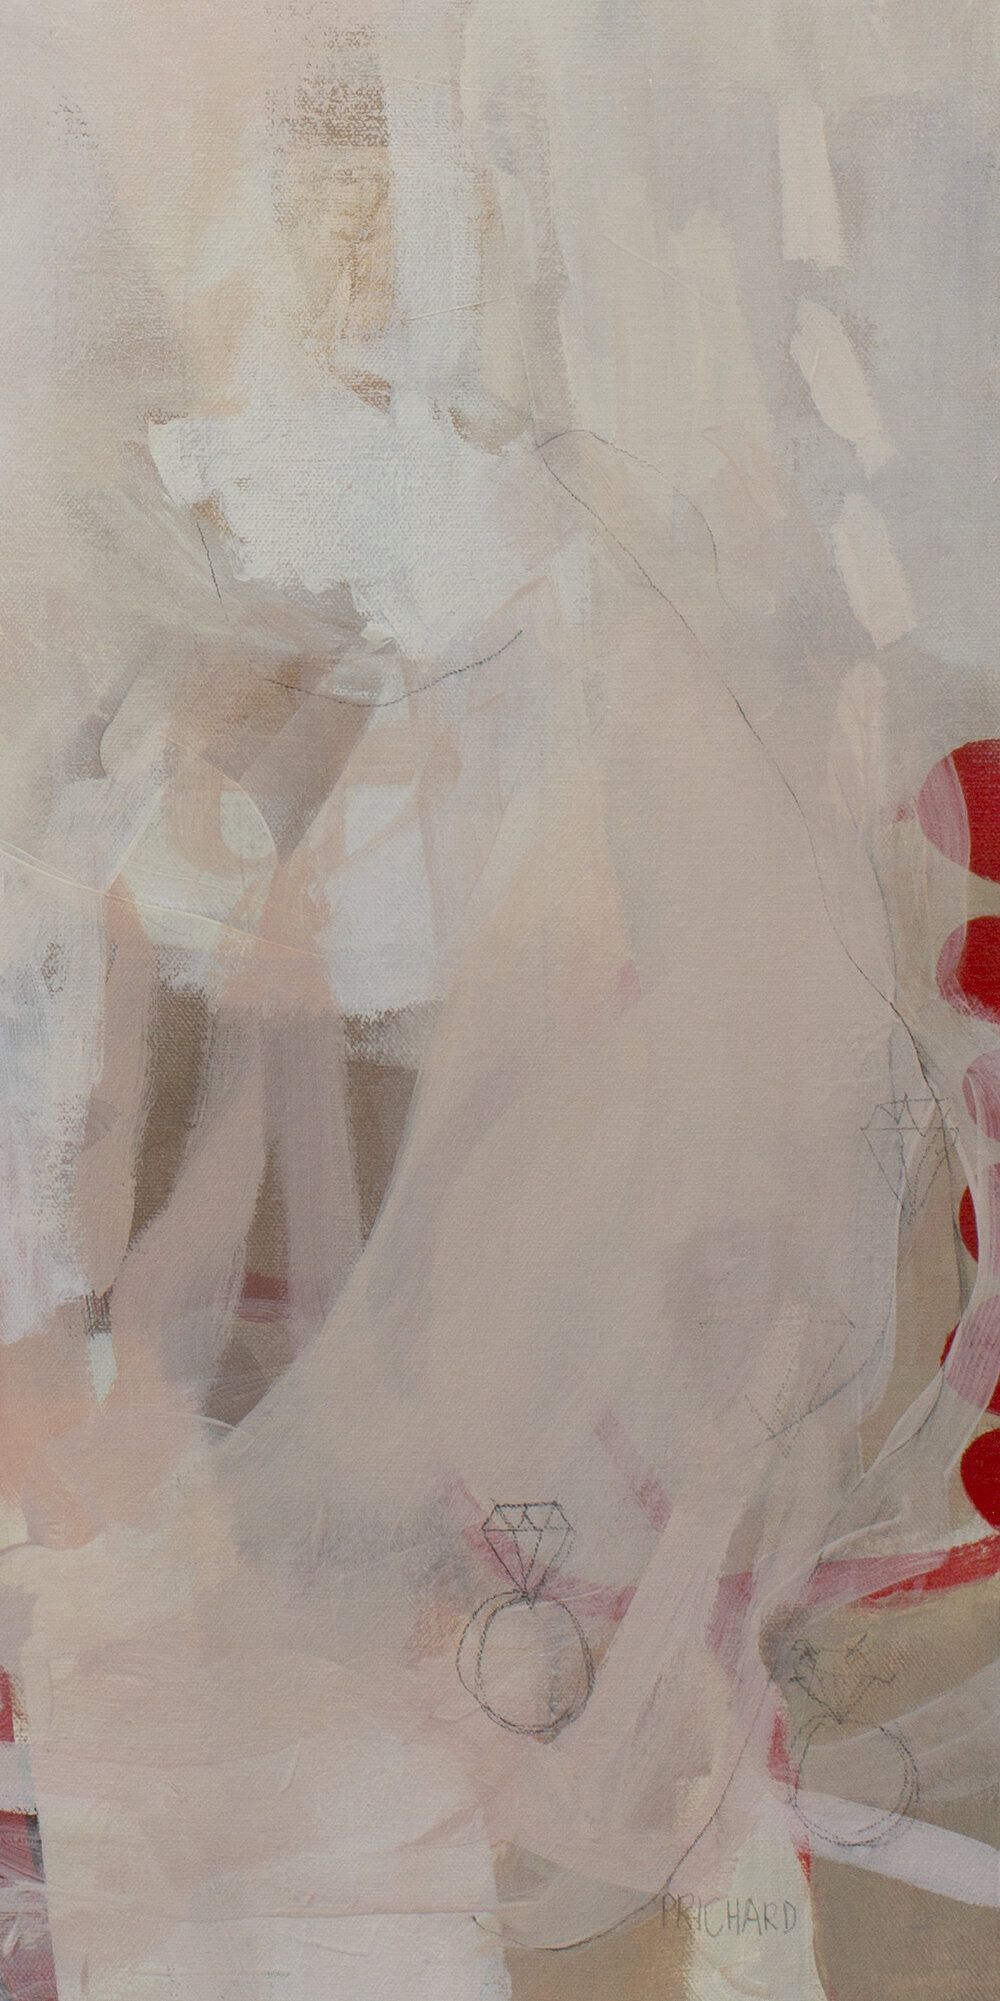 An abstract painting with white, red, and pale pink hues. - Angelcore